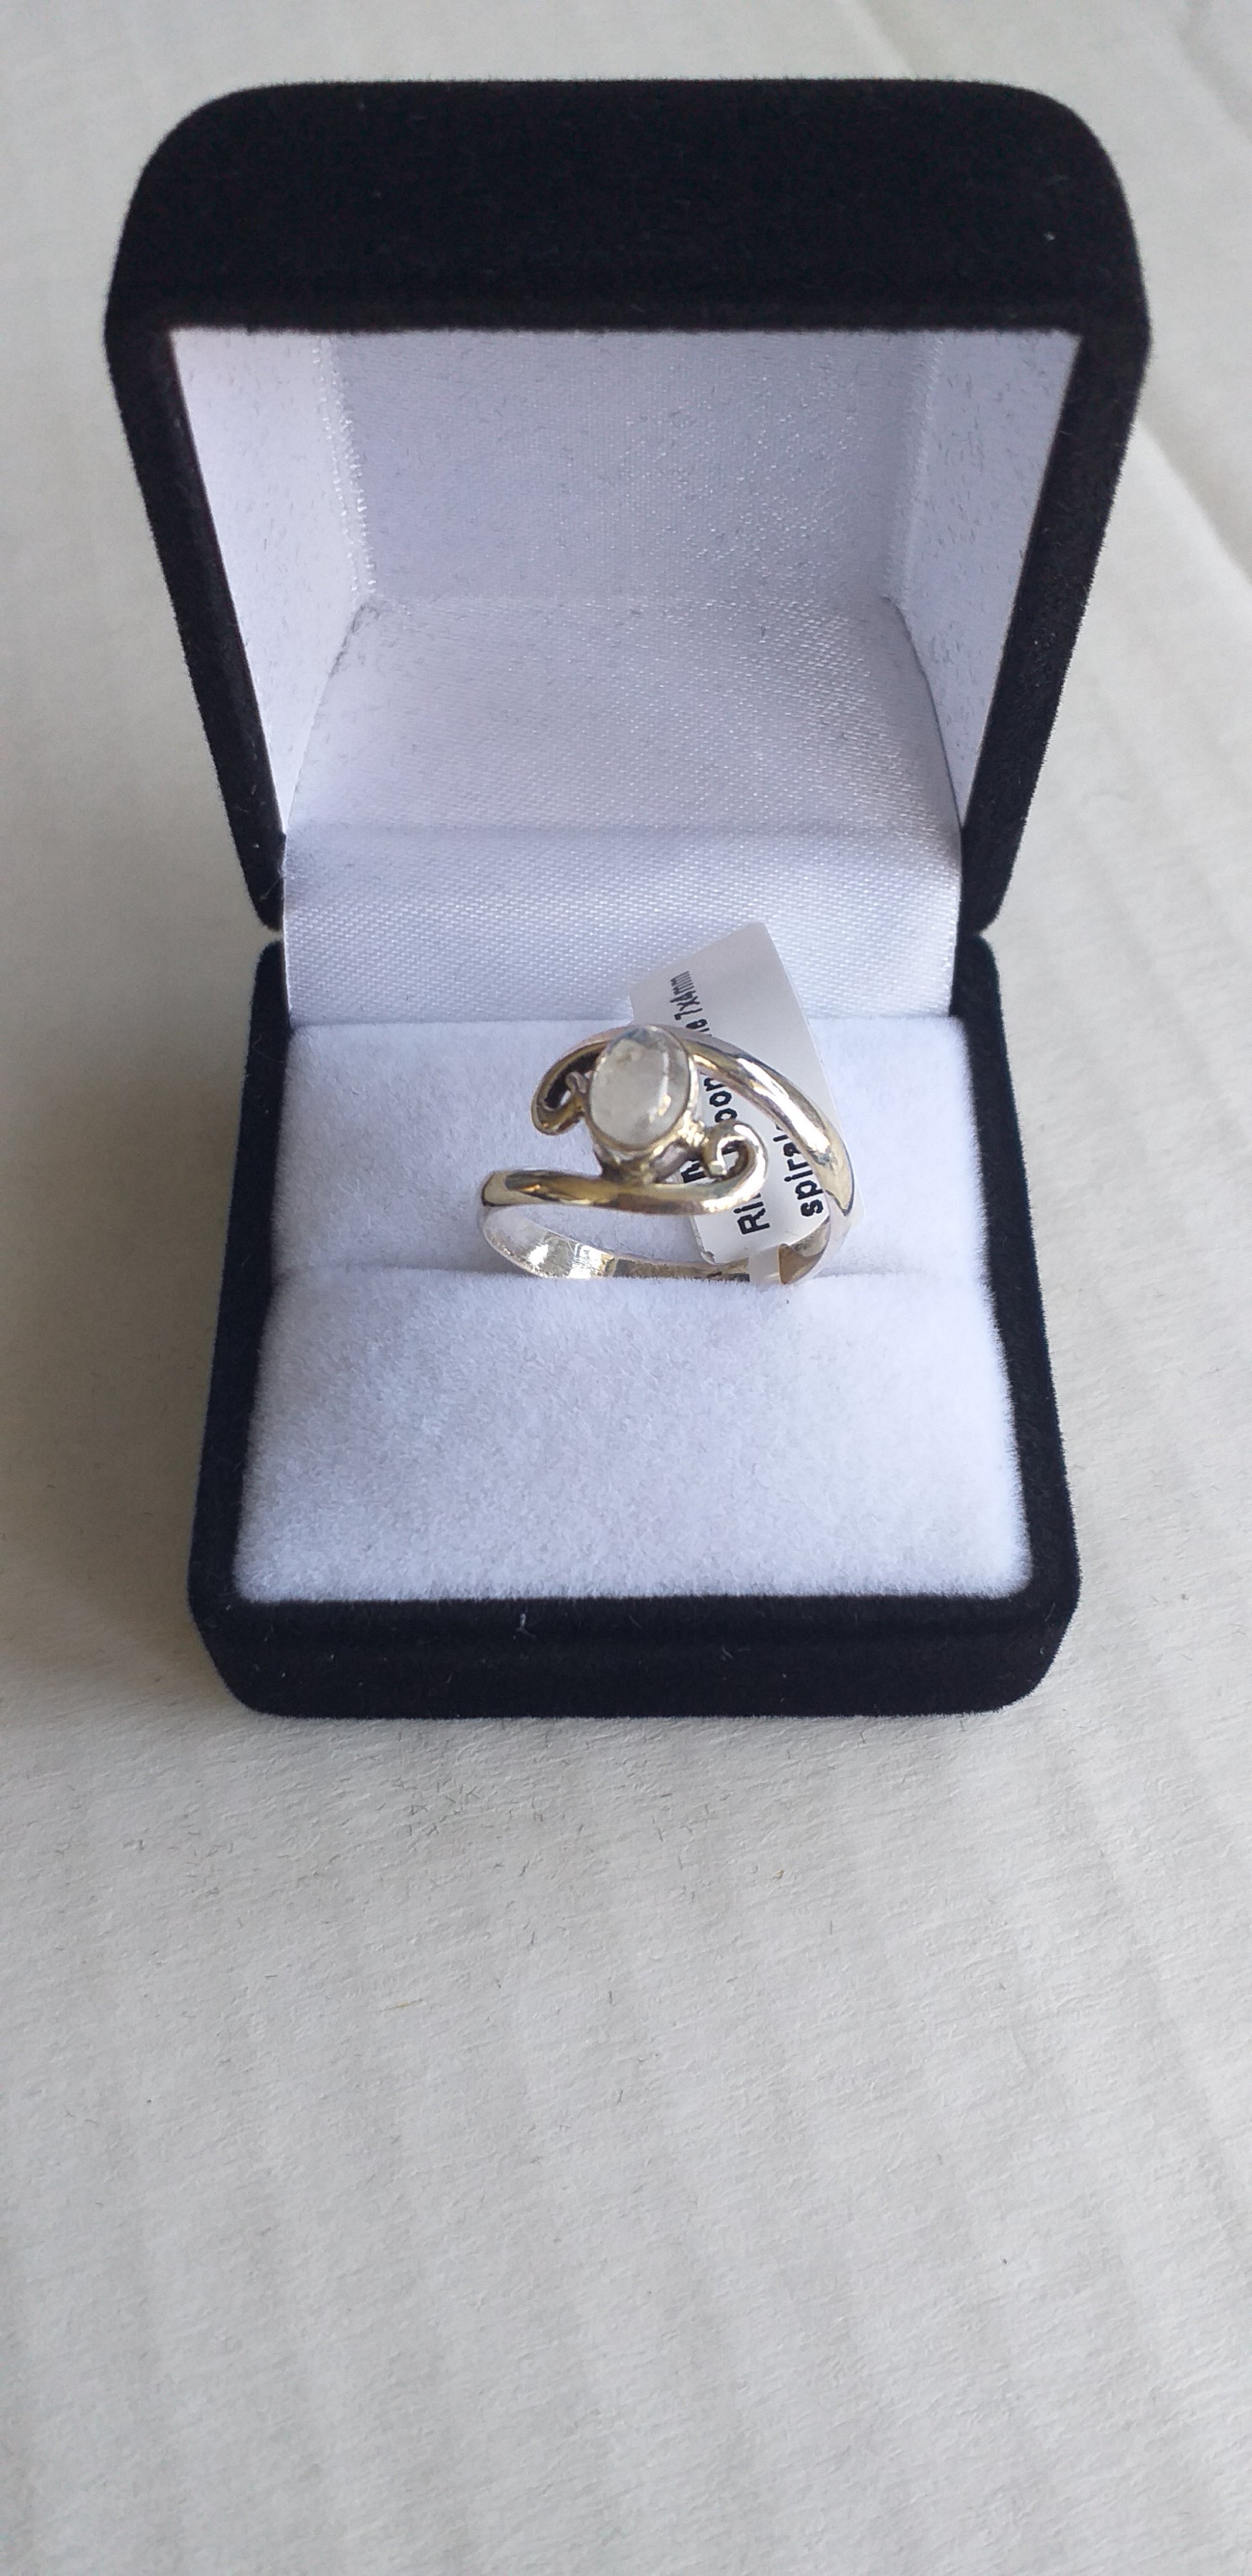 Ring, Moonstone spiral band in Sterling Silver, - Broadfield Flowers Florist Lincoln